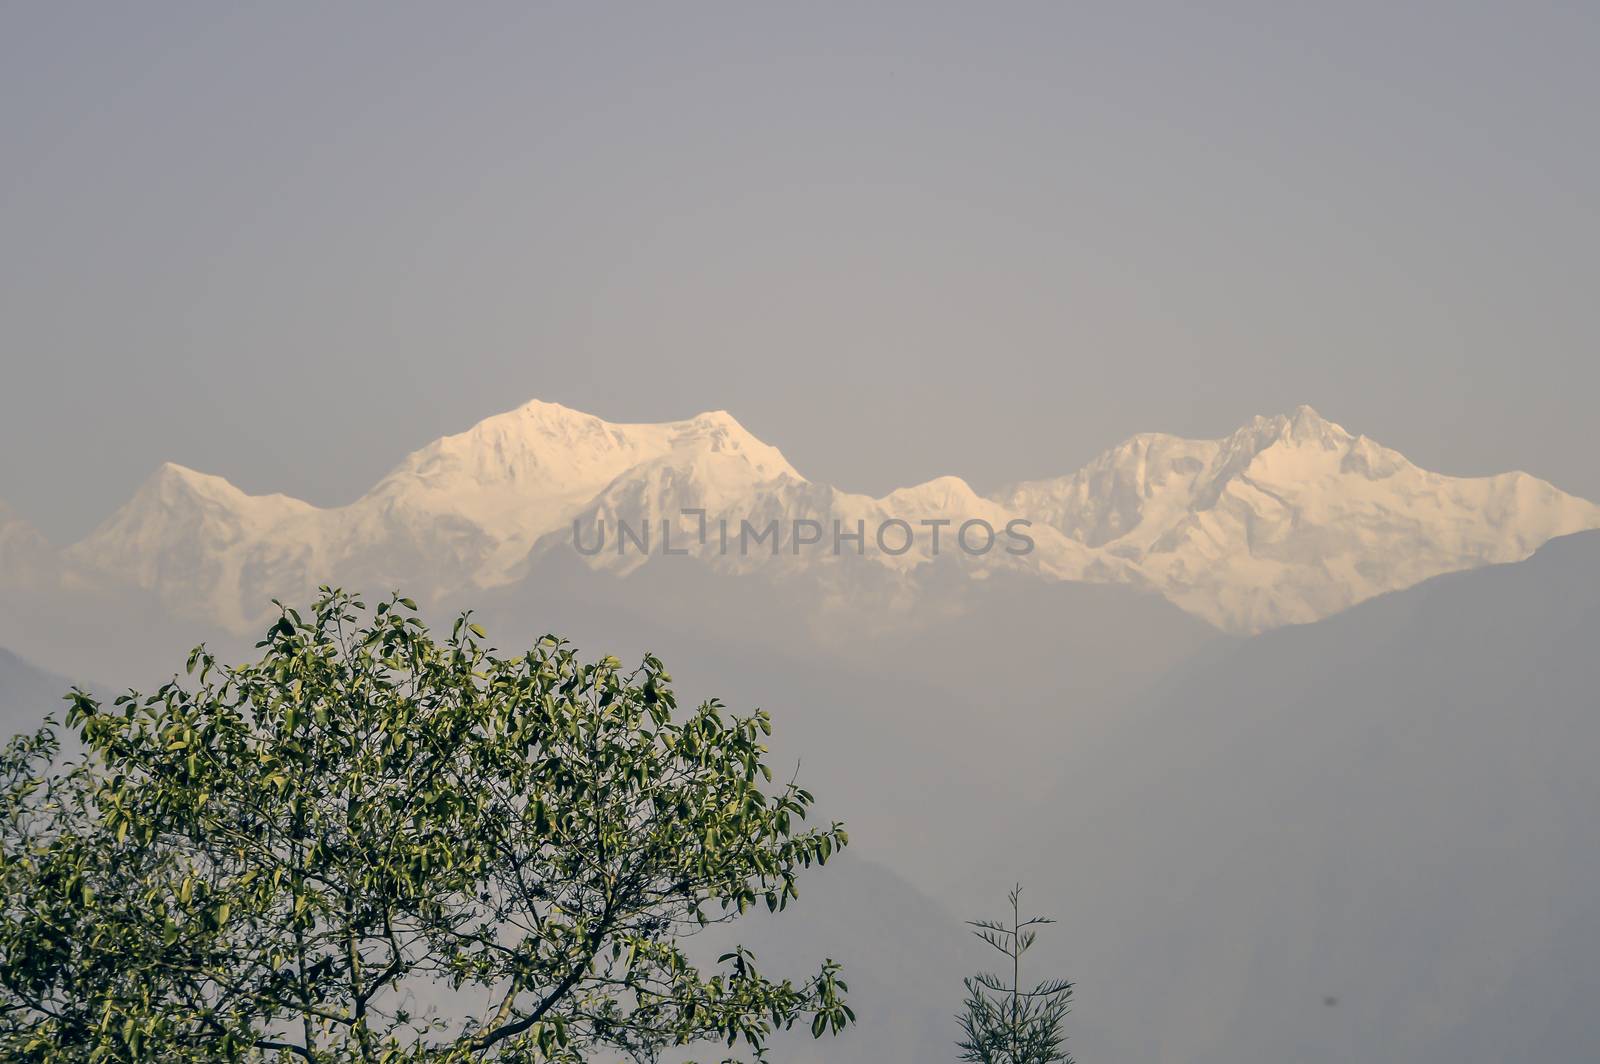 Beautiful view of White snowy tops of Himalayan mountain range in morning. ( Kanchanjungha range from dzongri pass sikkim near Pelling Helipad) Its a popular tourist destination place of north India.